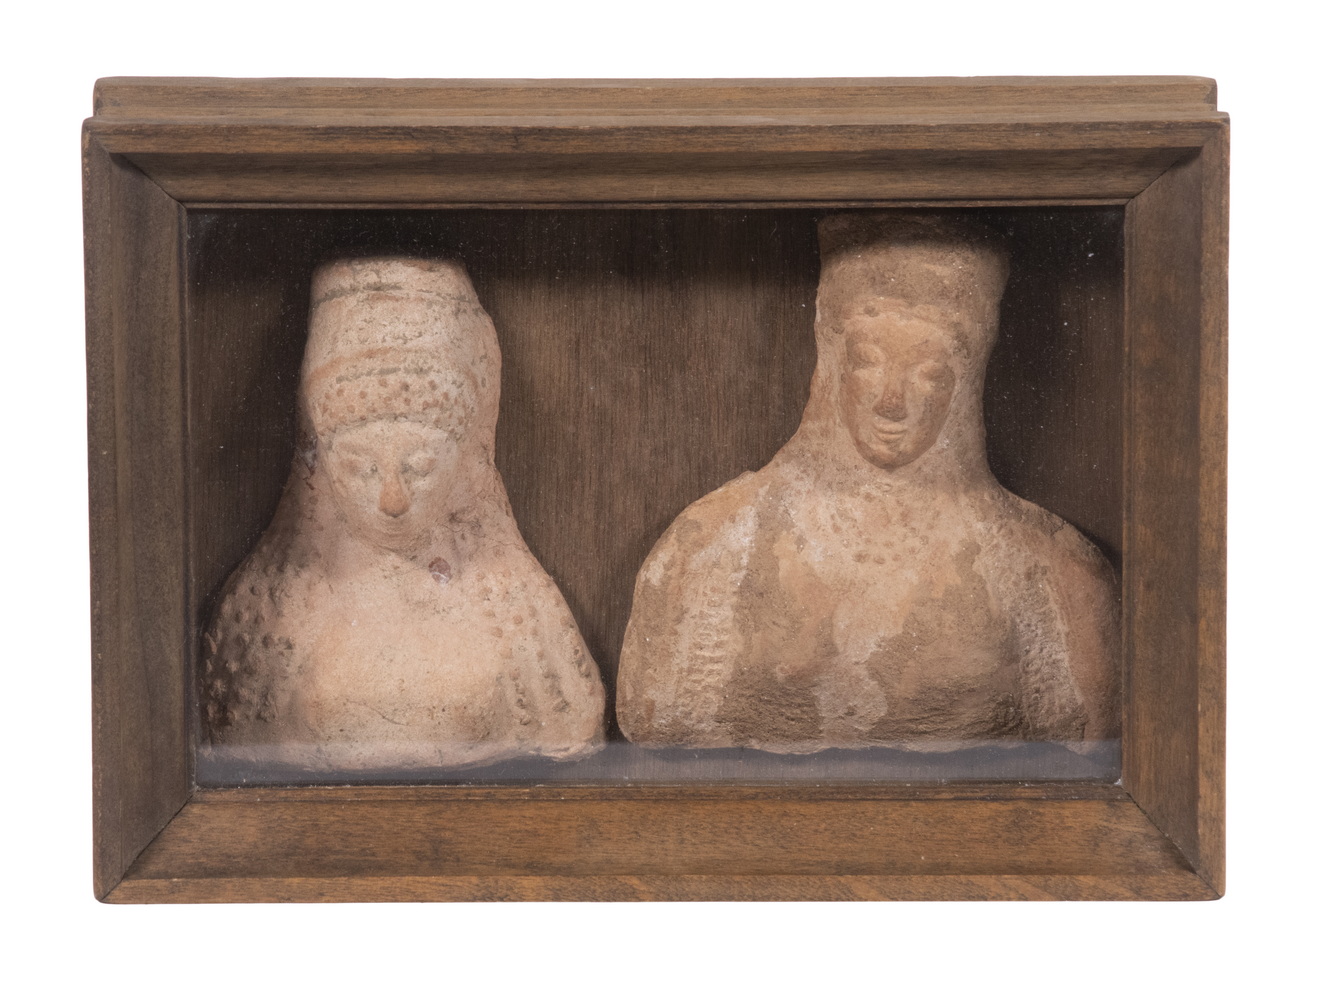 (2) ETRUSCAN CLAY BUSTS OF WOMEN IN